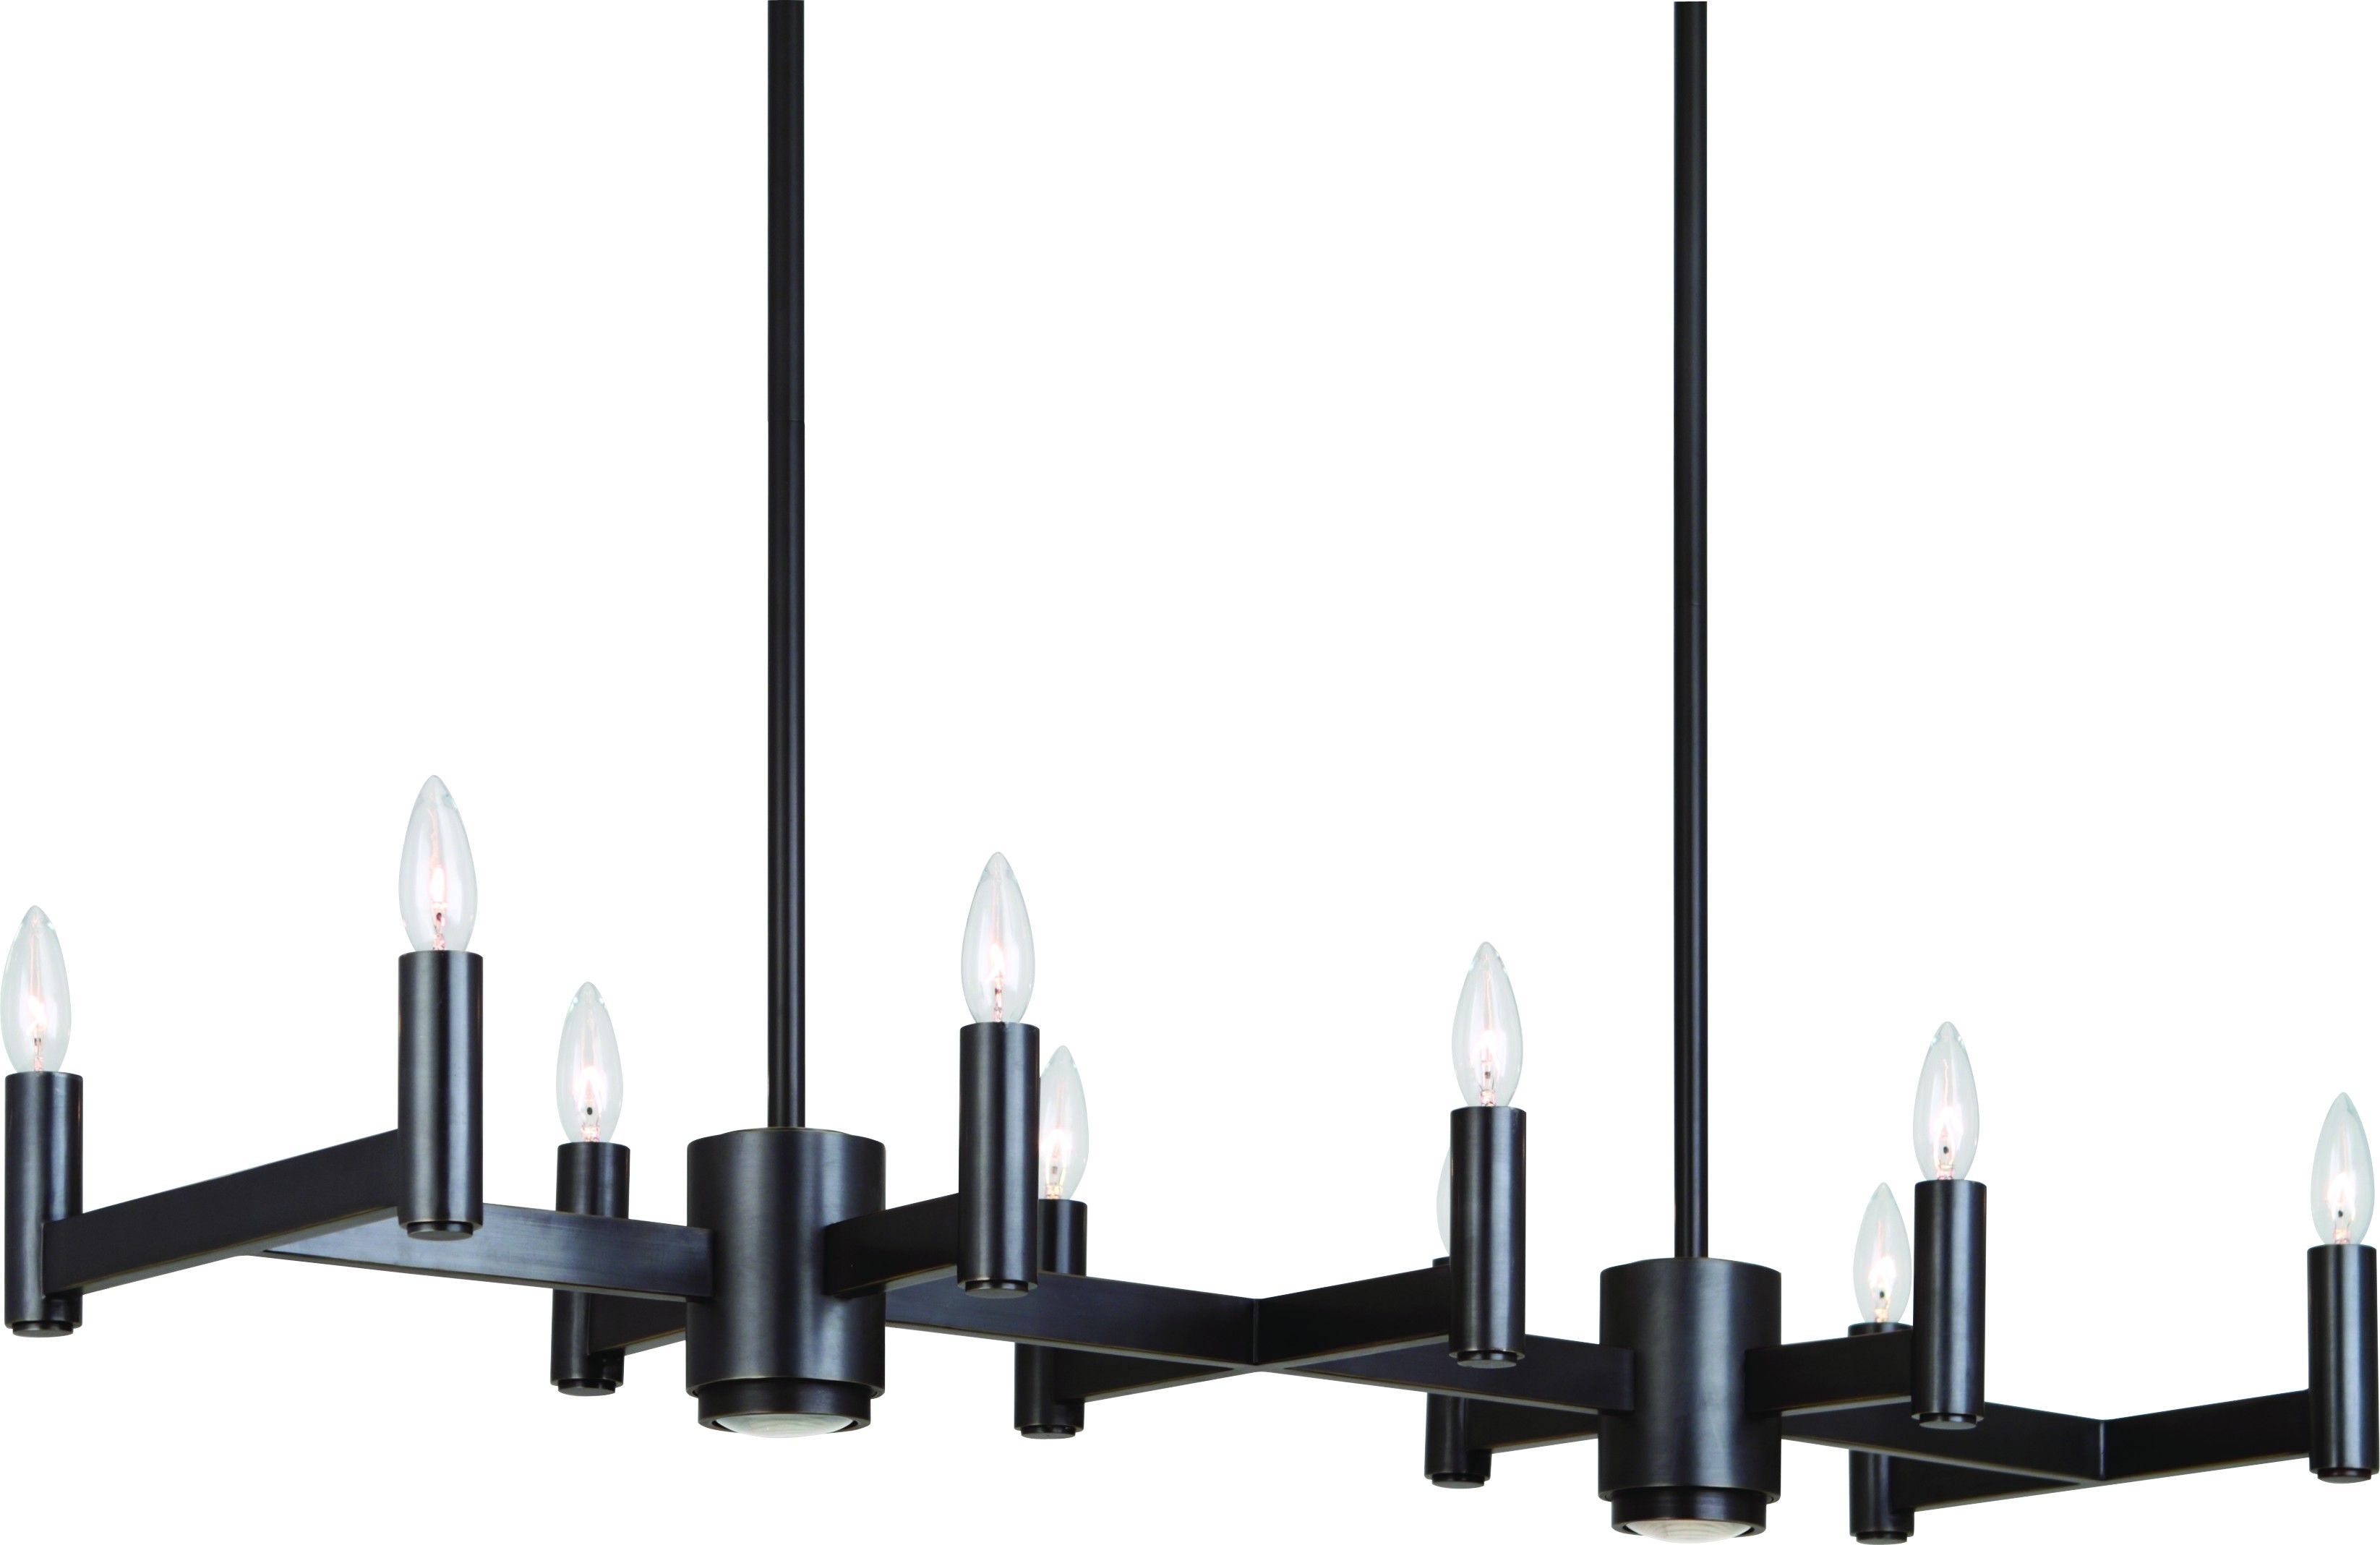 Furniture Hanging Rectangular Modern Black Wrought Iron Chandeliers With Lamp Holder For Dining Room Lighting Ideas Iron Chandelier Small Wrought Iron Pertaining To Modern Black Chandelier (View 5 of 12)